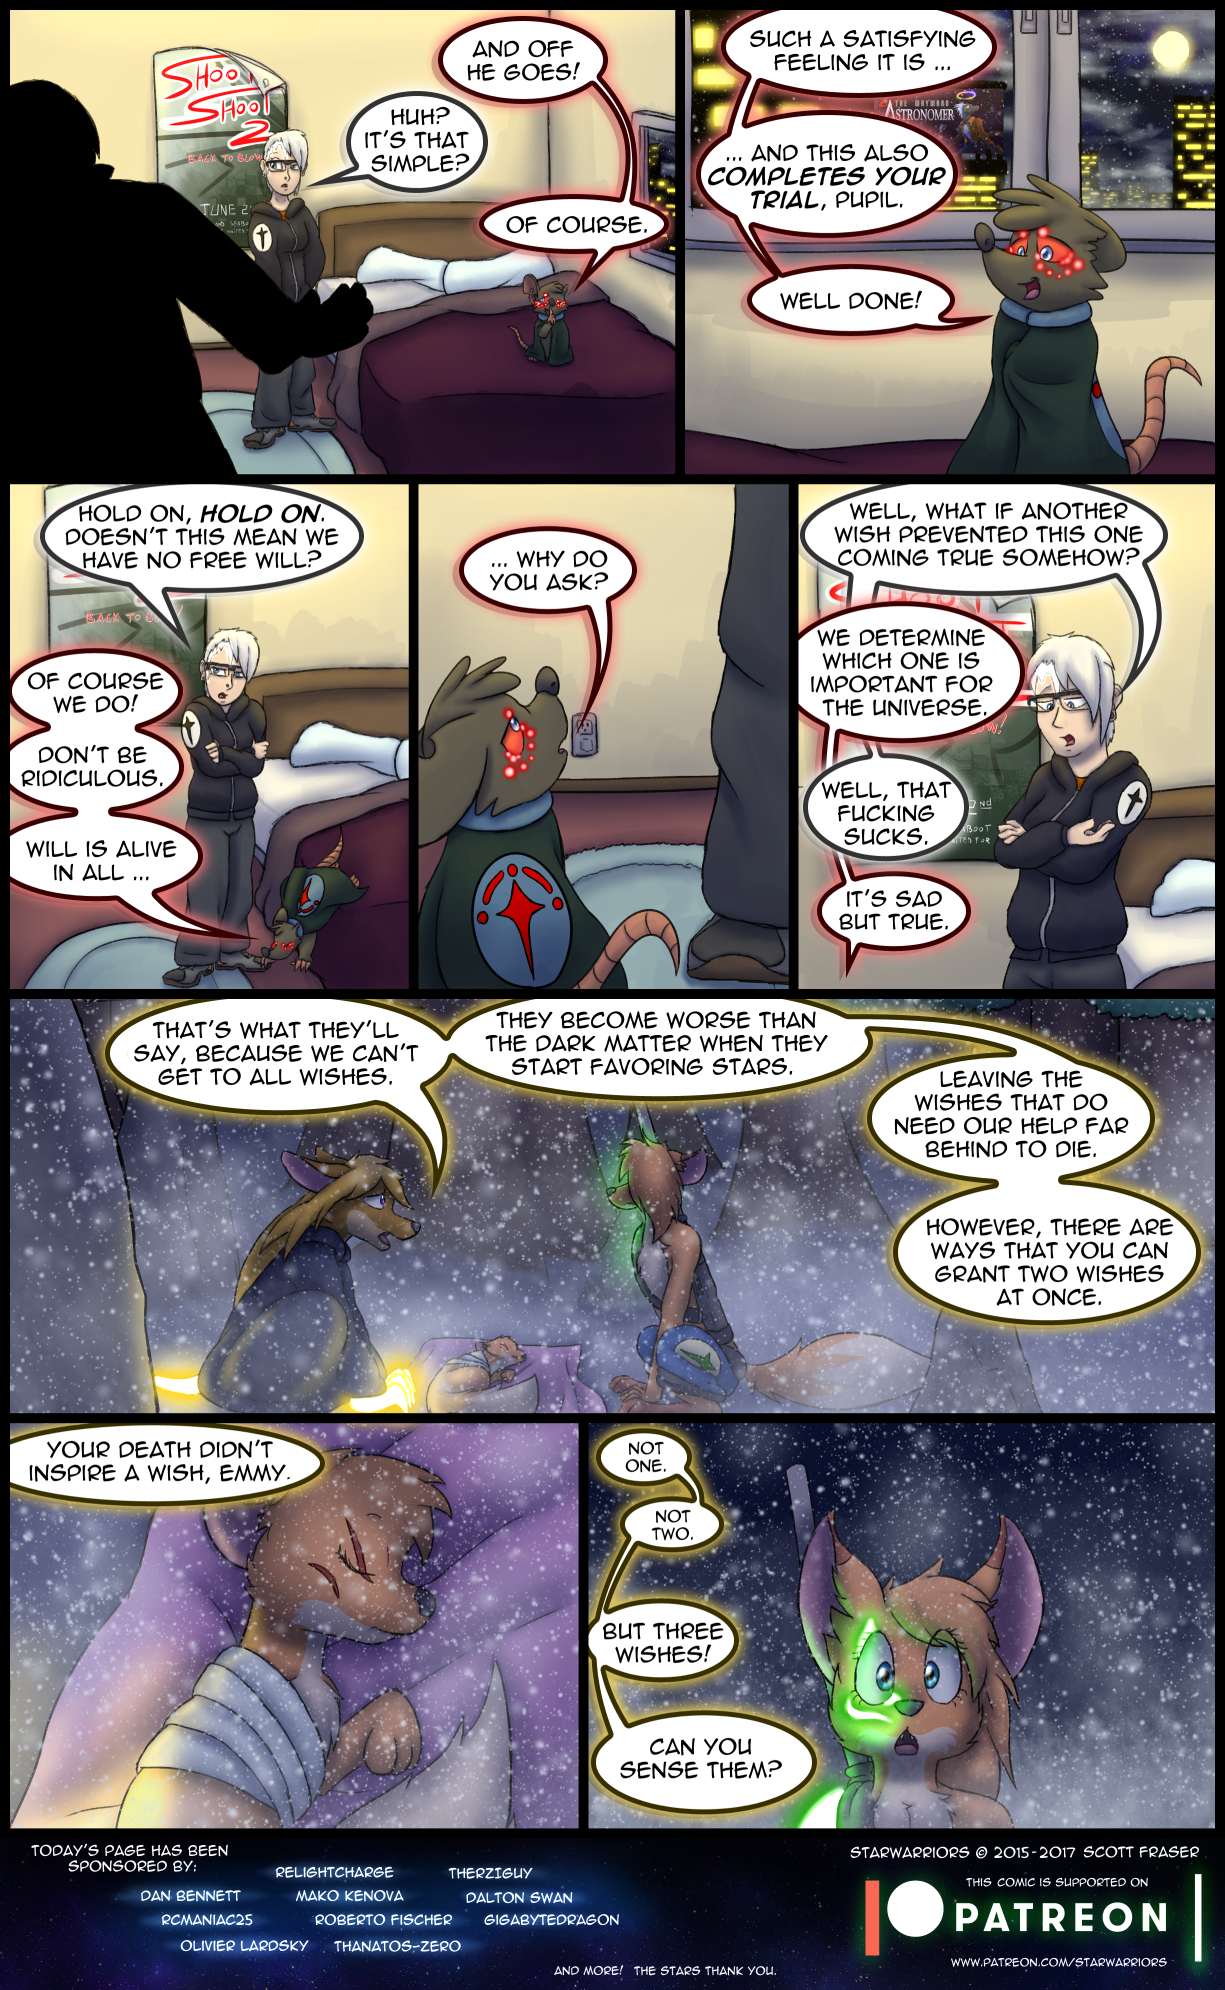 Ch3 Page 8 – More than One